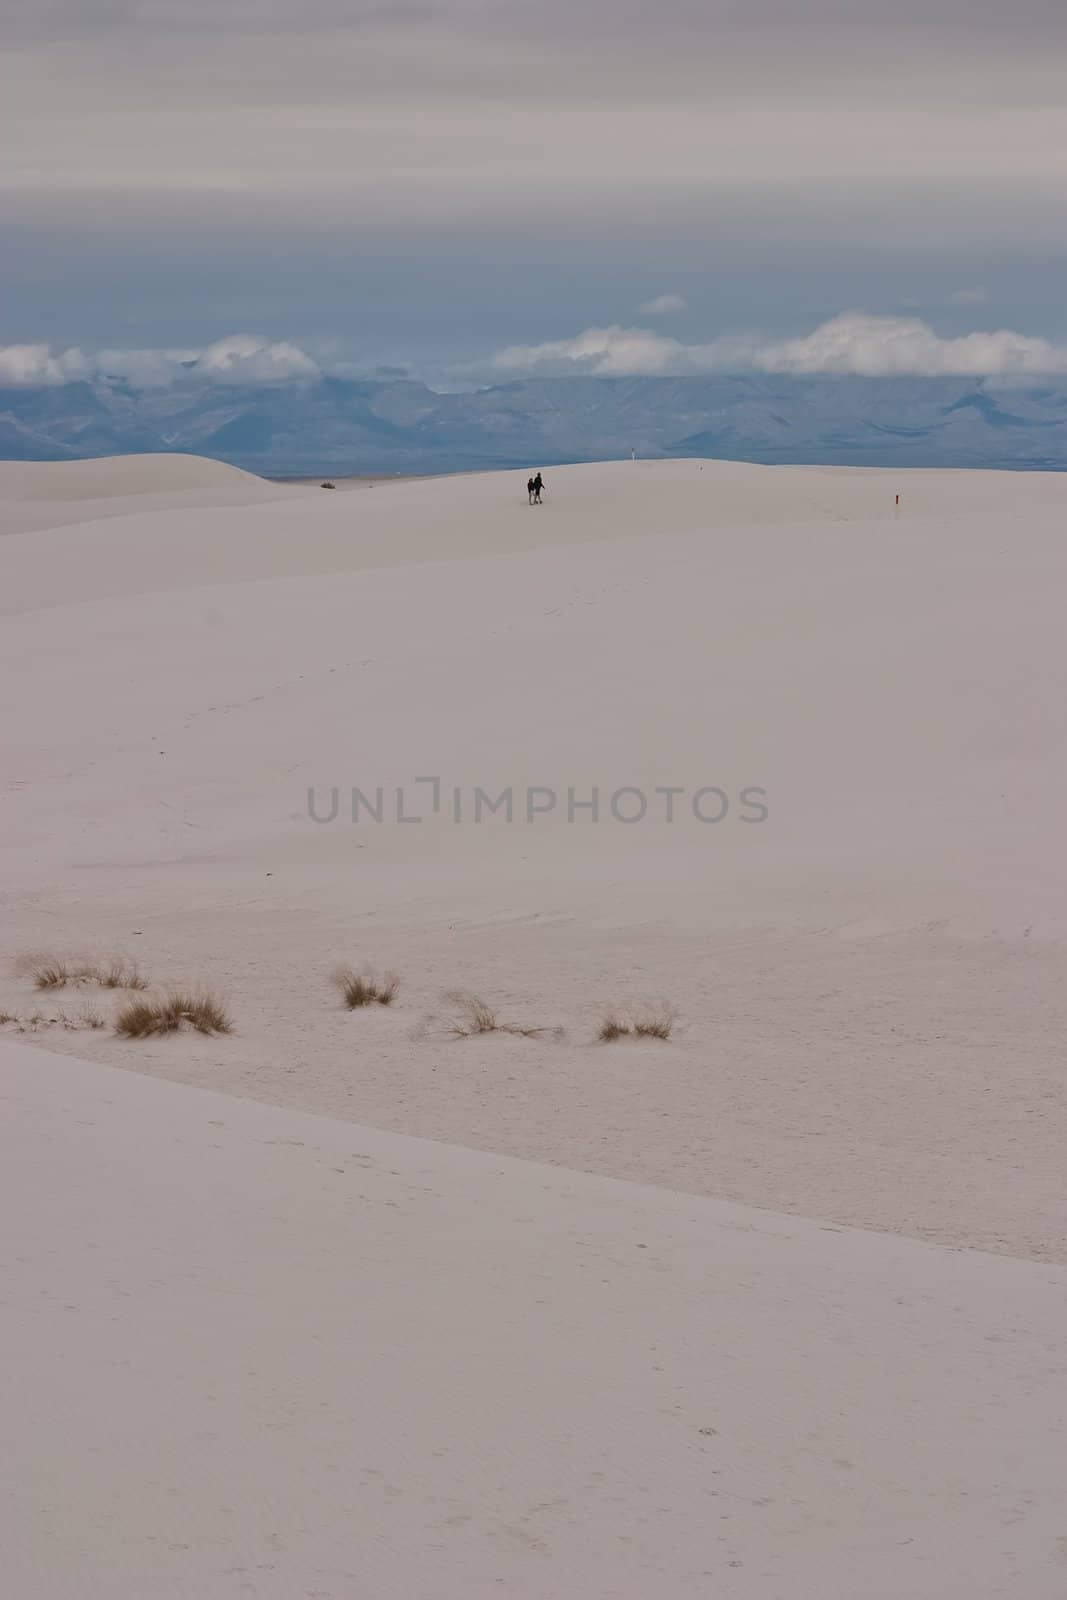 White Sands National Monument is a U.S. National Monument located about 25 km (15 miles) southwest of Alamogordo in western Otero County and northeastern Dona Ana County in the state of New Mexico